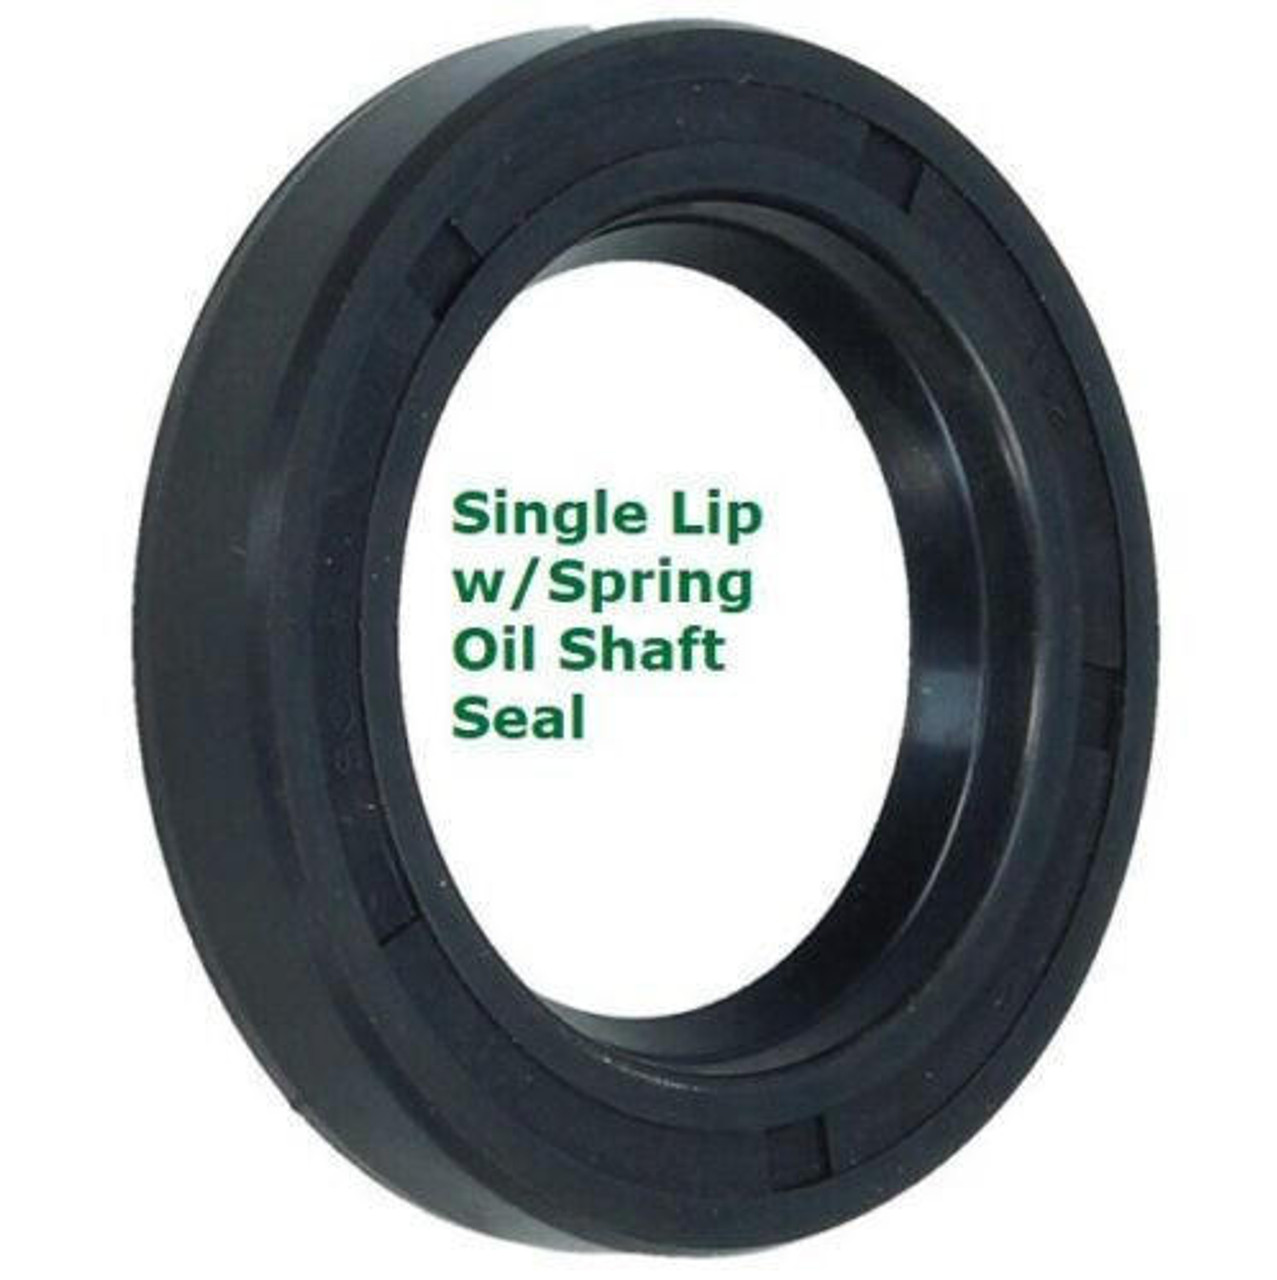 Metric Oil Shaft Seal 125 x 160 x 13mm   Price for 1 pc